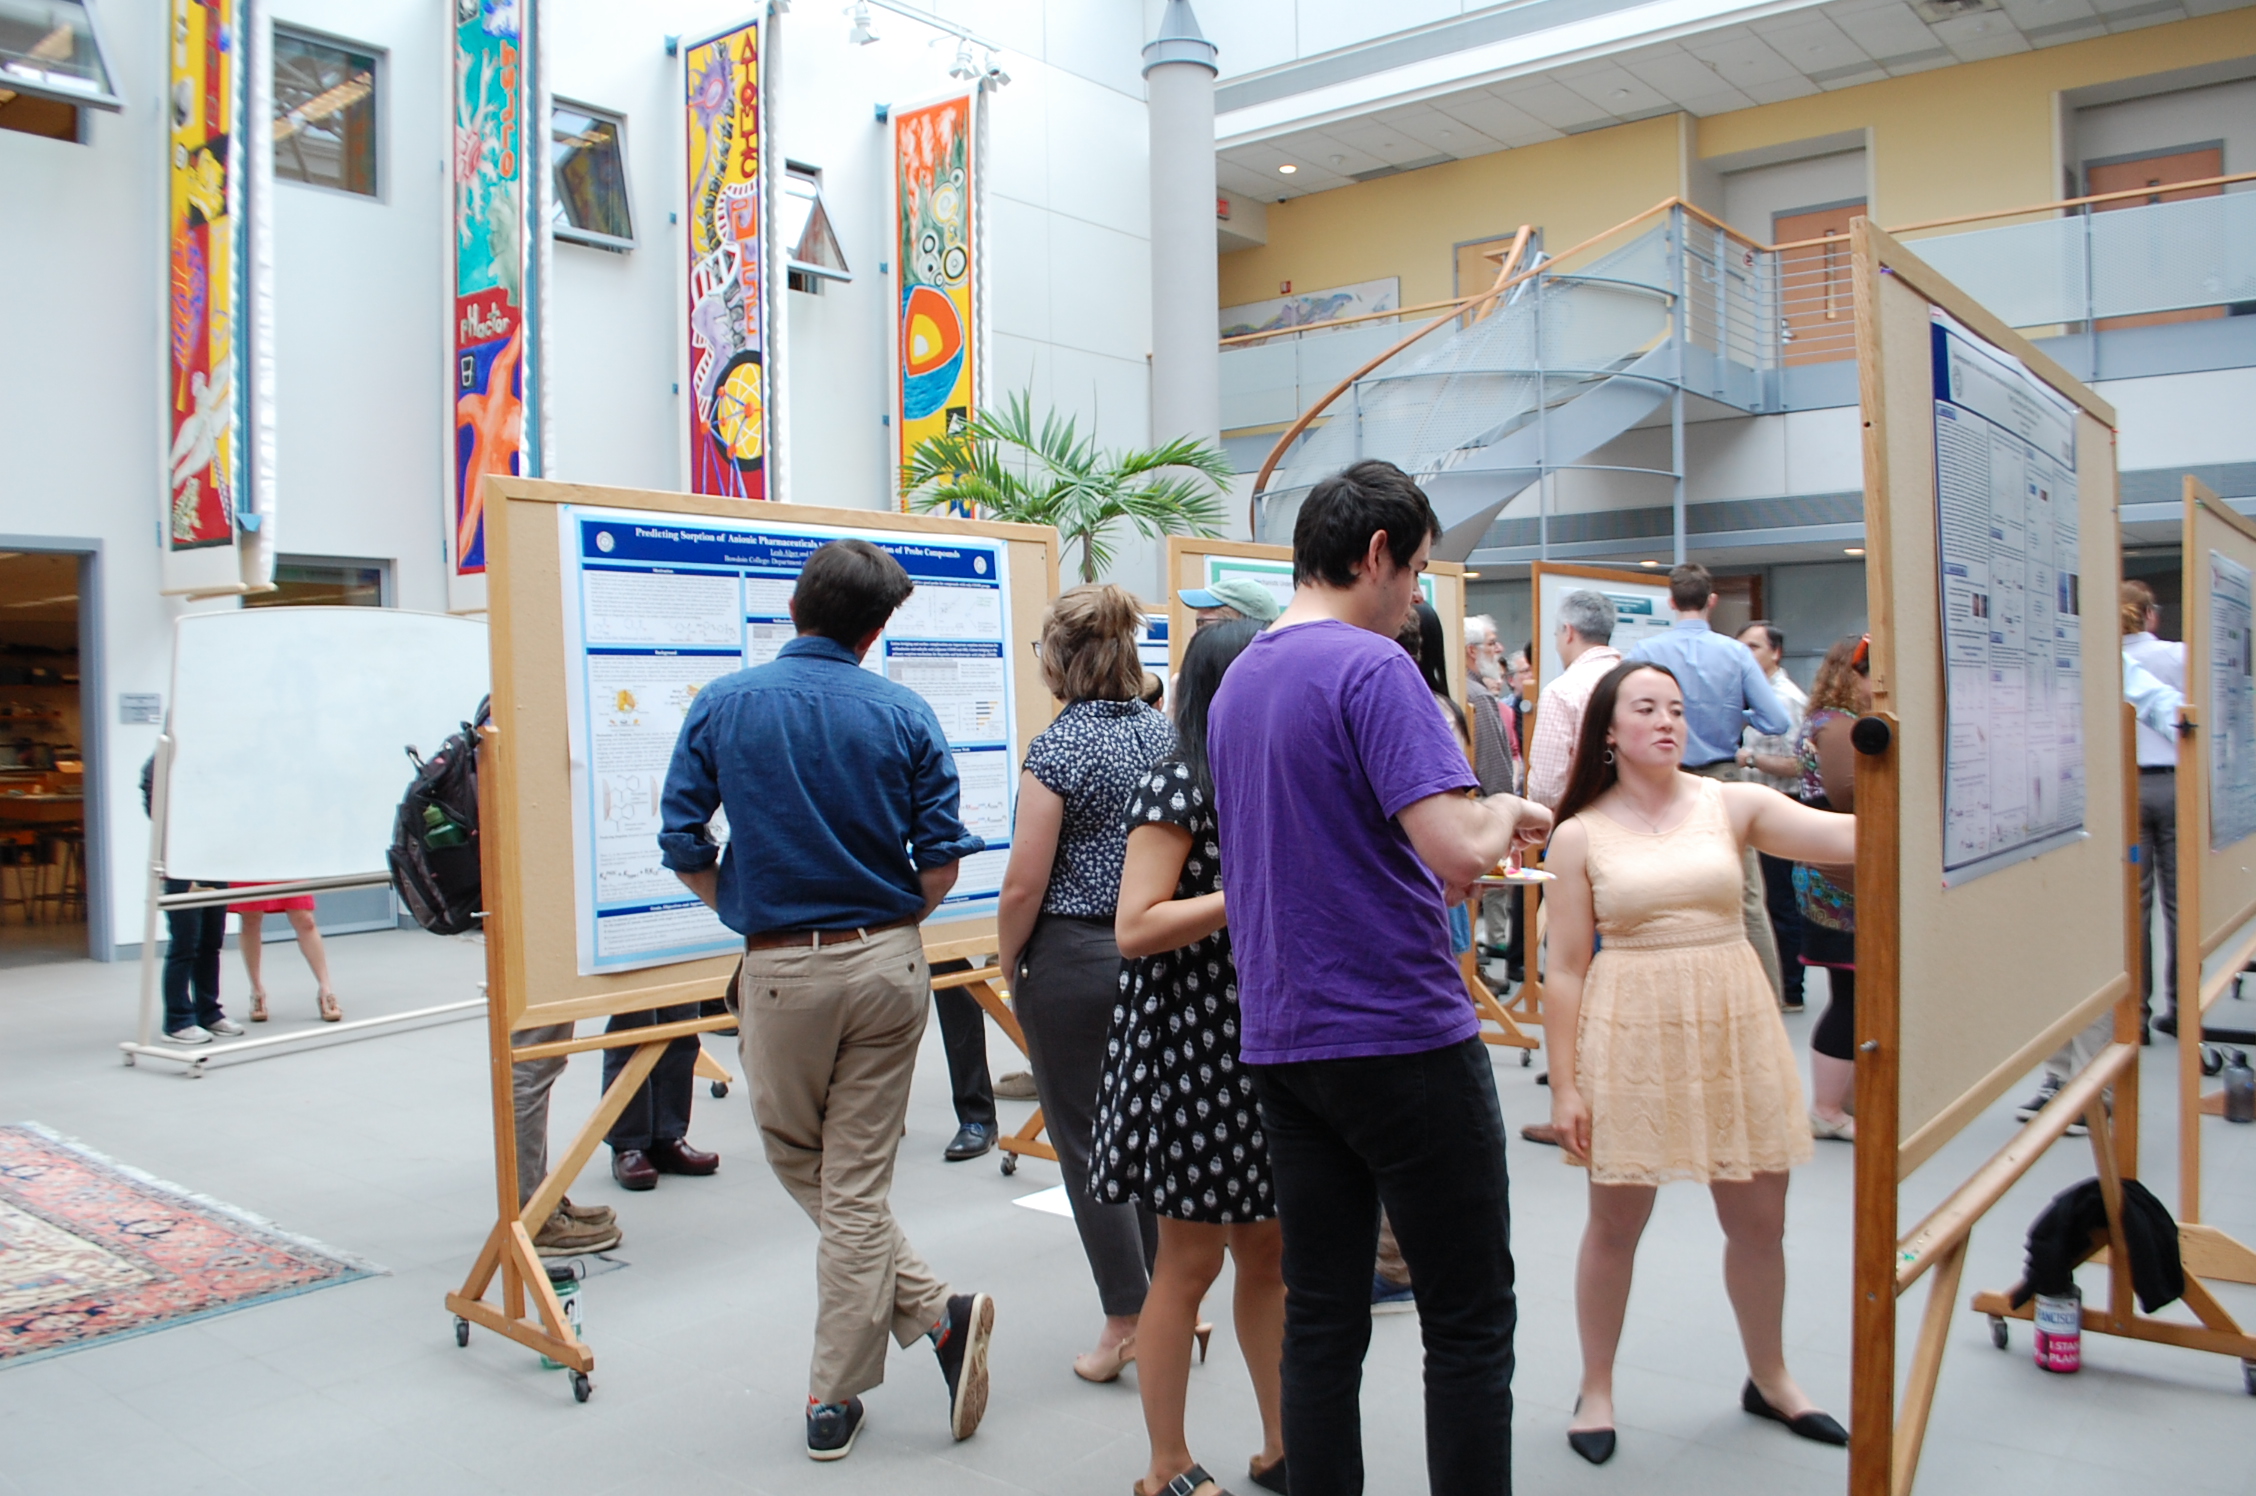 Students presenting honors posters in Druckenmiller atrium